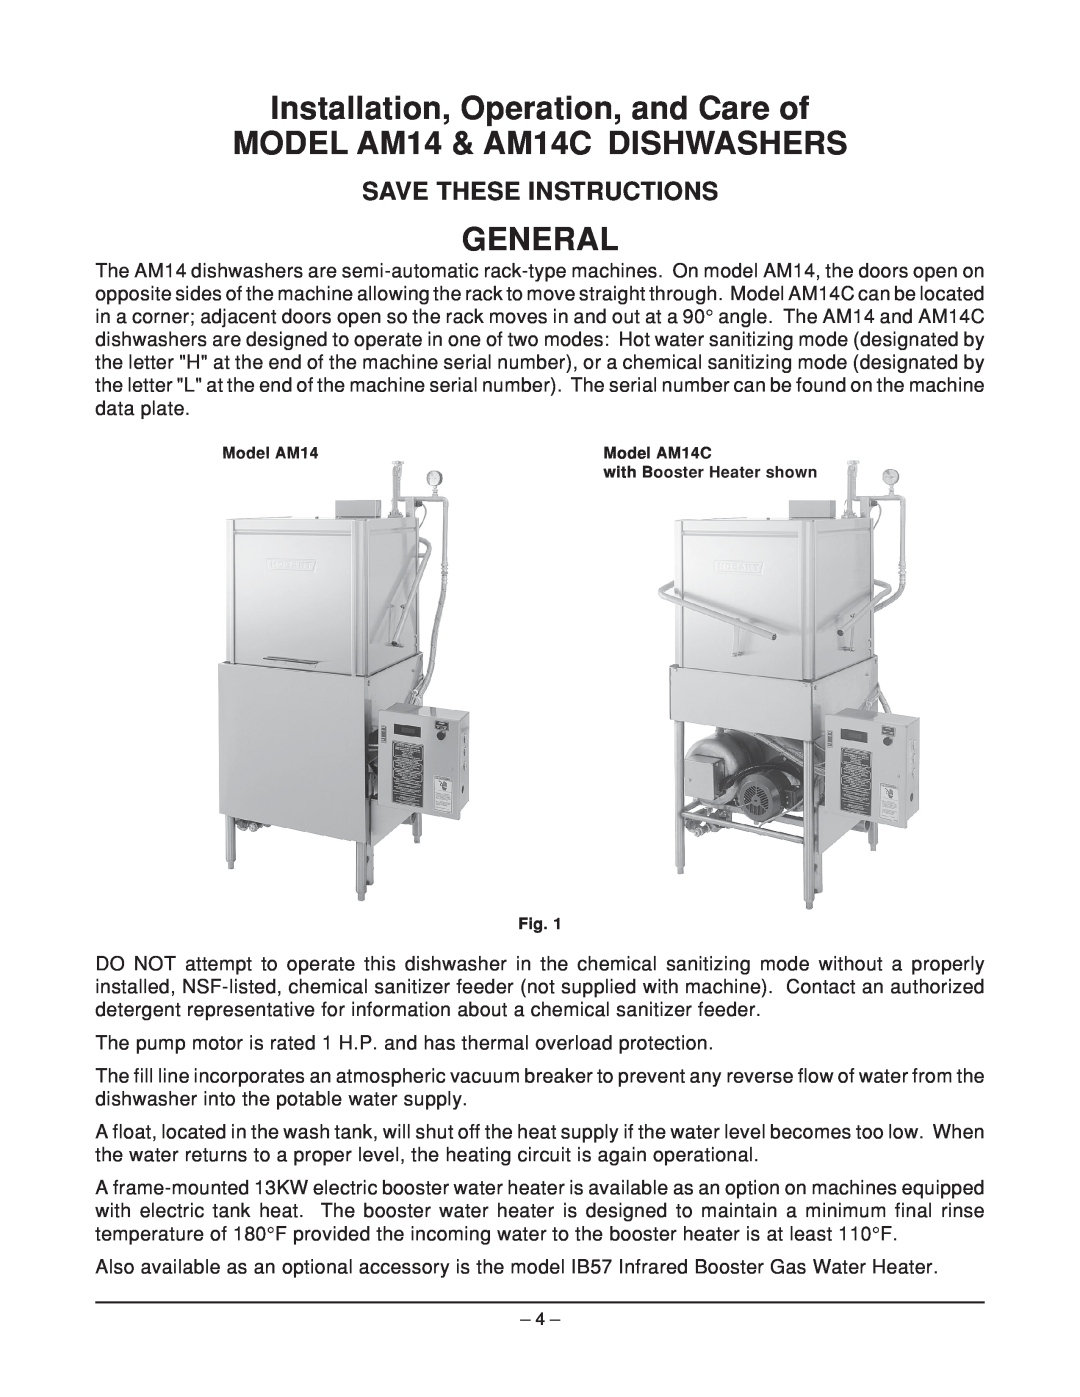 Hobart AM14 ML-110976, AM14C ML-110977 manual Installation, Operation, and Care of, MODEL AM14 & AM14C DISHWASHERS, General 